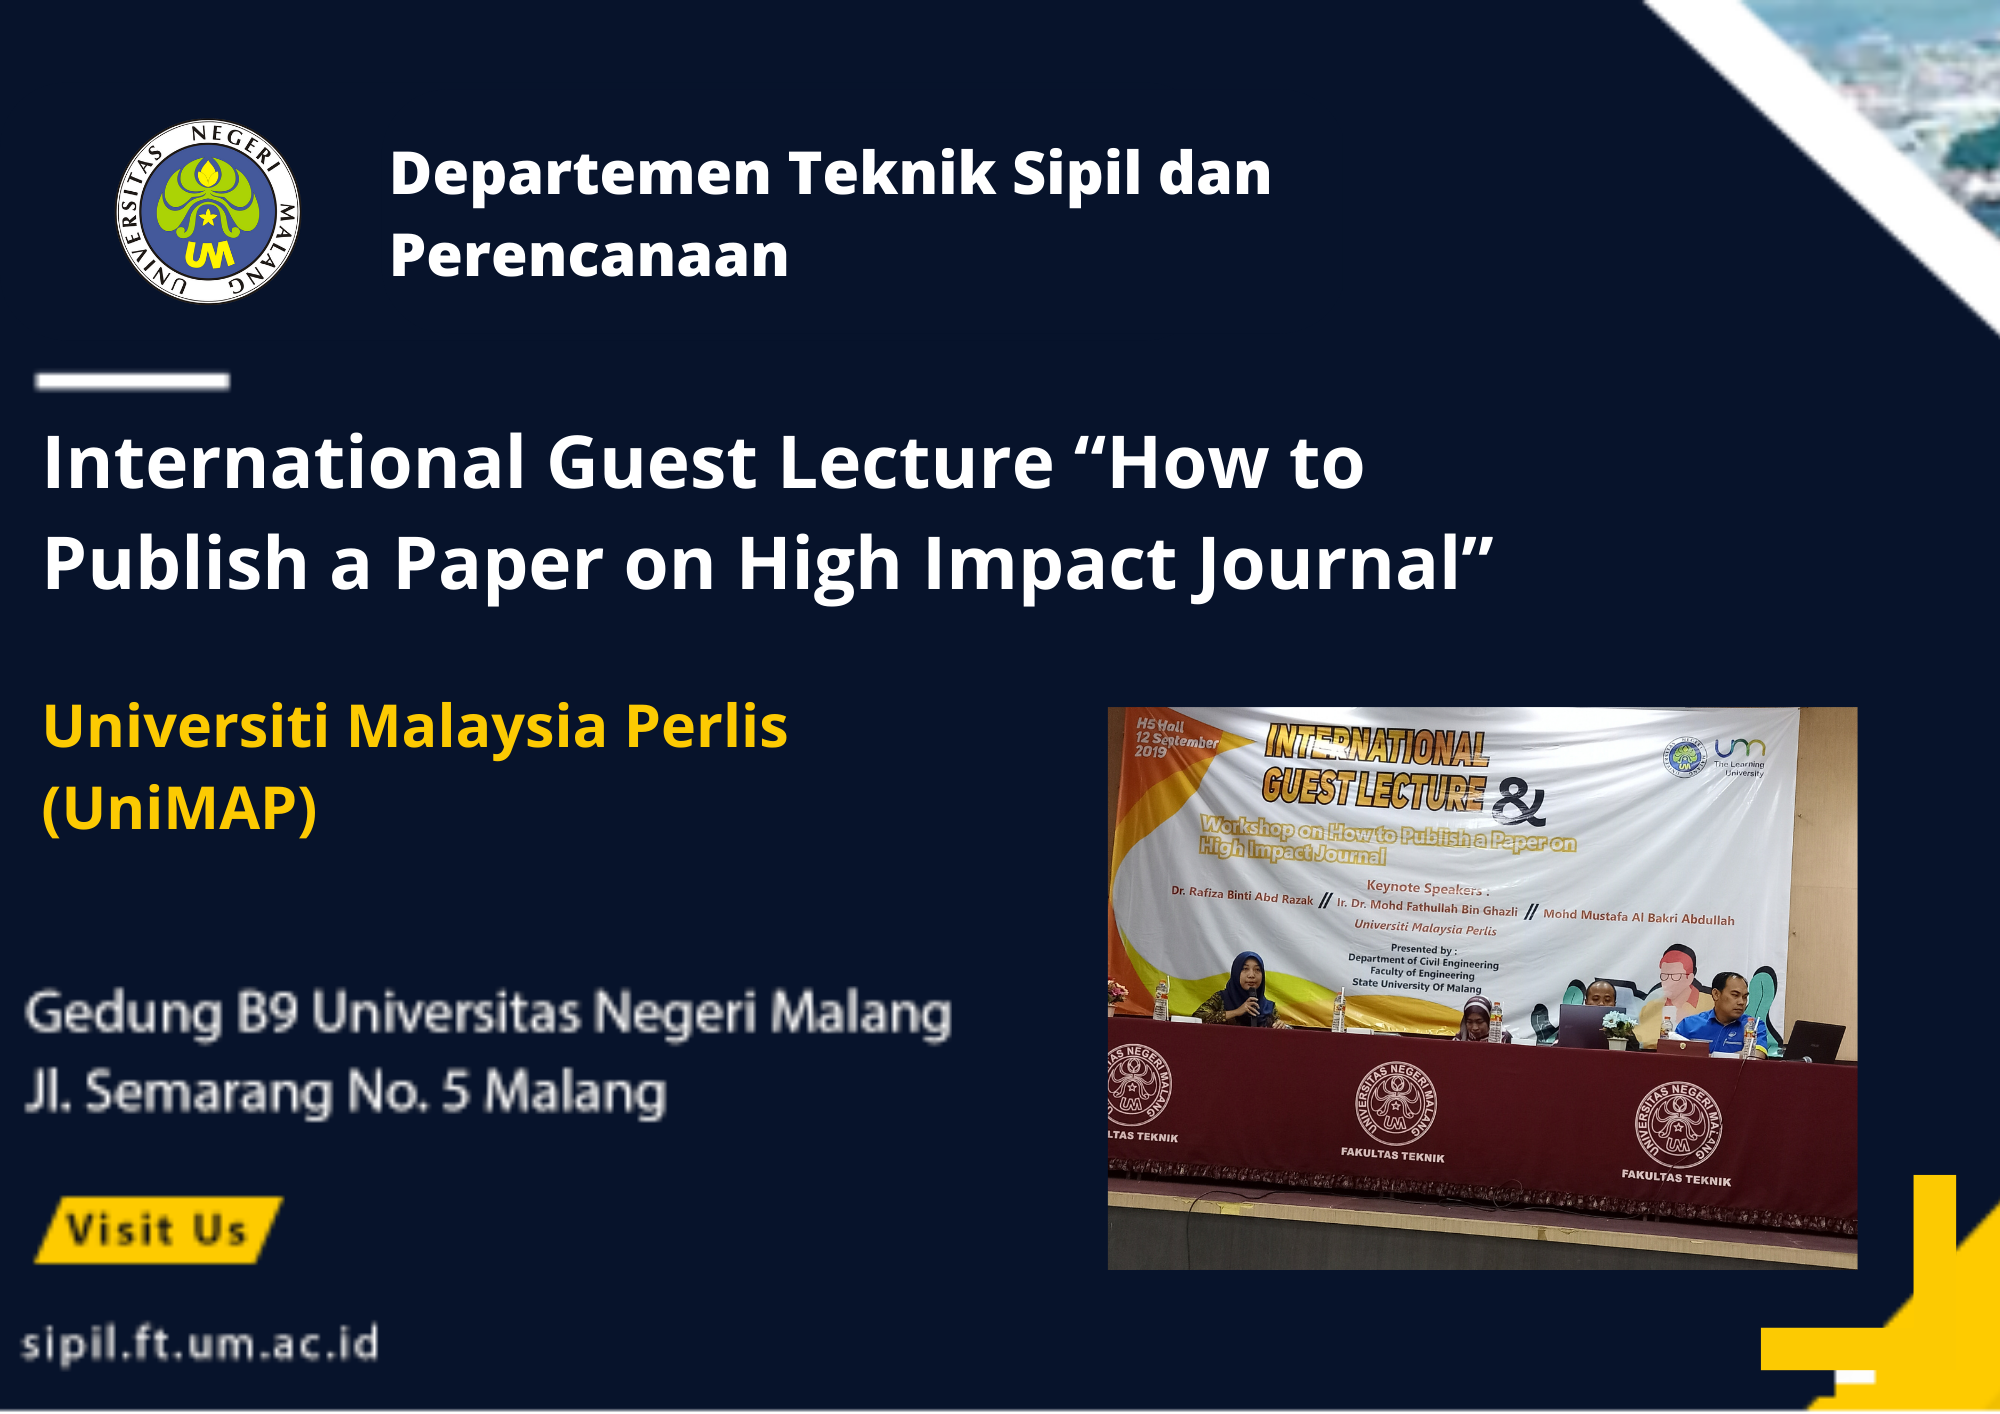 Kegiatan International Guest Lecture  “How to Publish a Paper on High Impact Journal” Universiti Malaysia Perlis